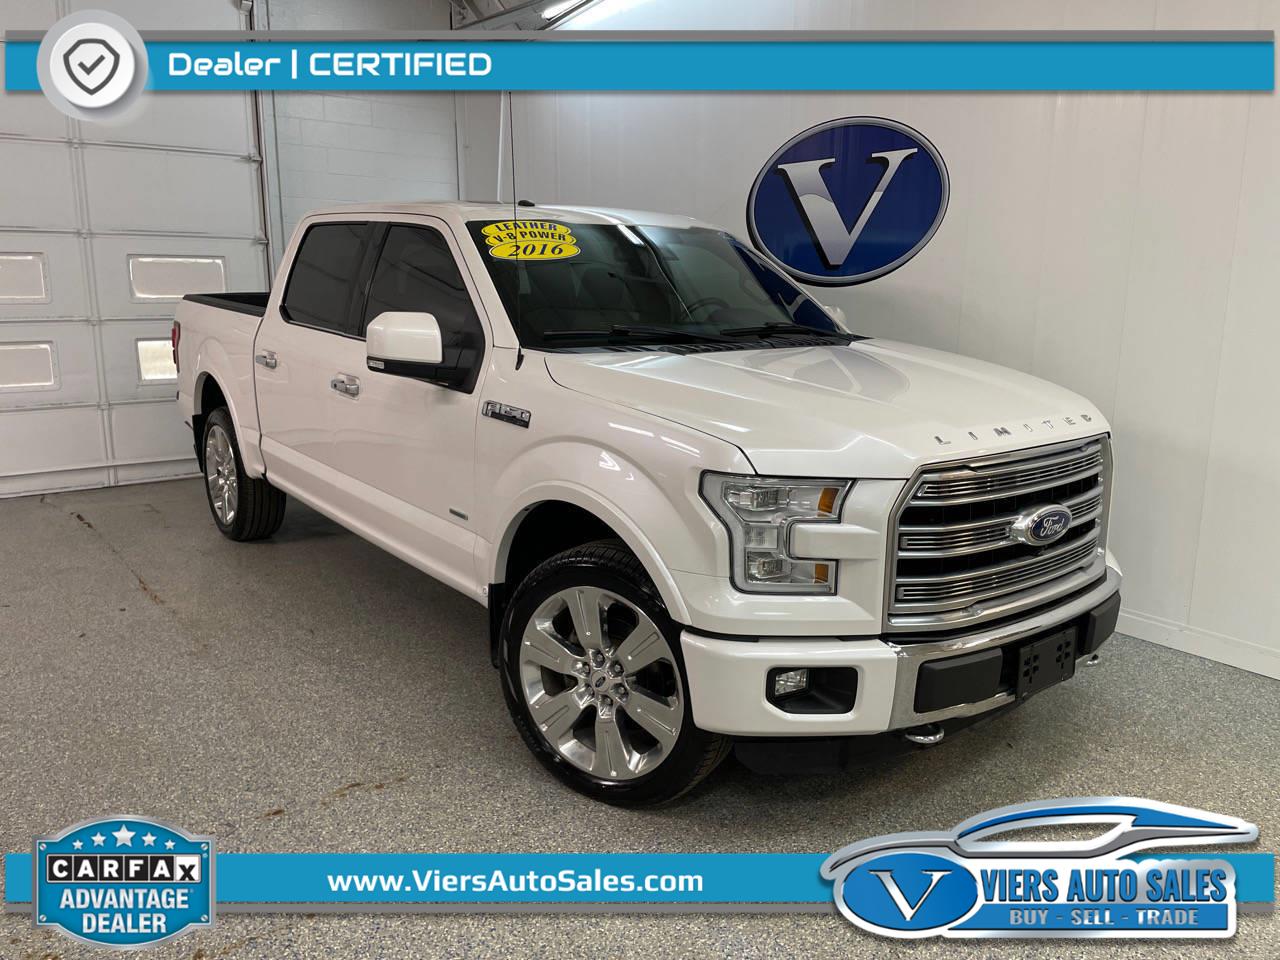 2016 Ford F-150 Limited 4WD